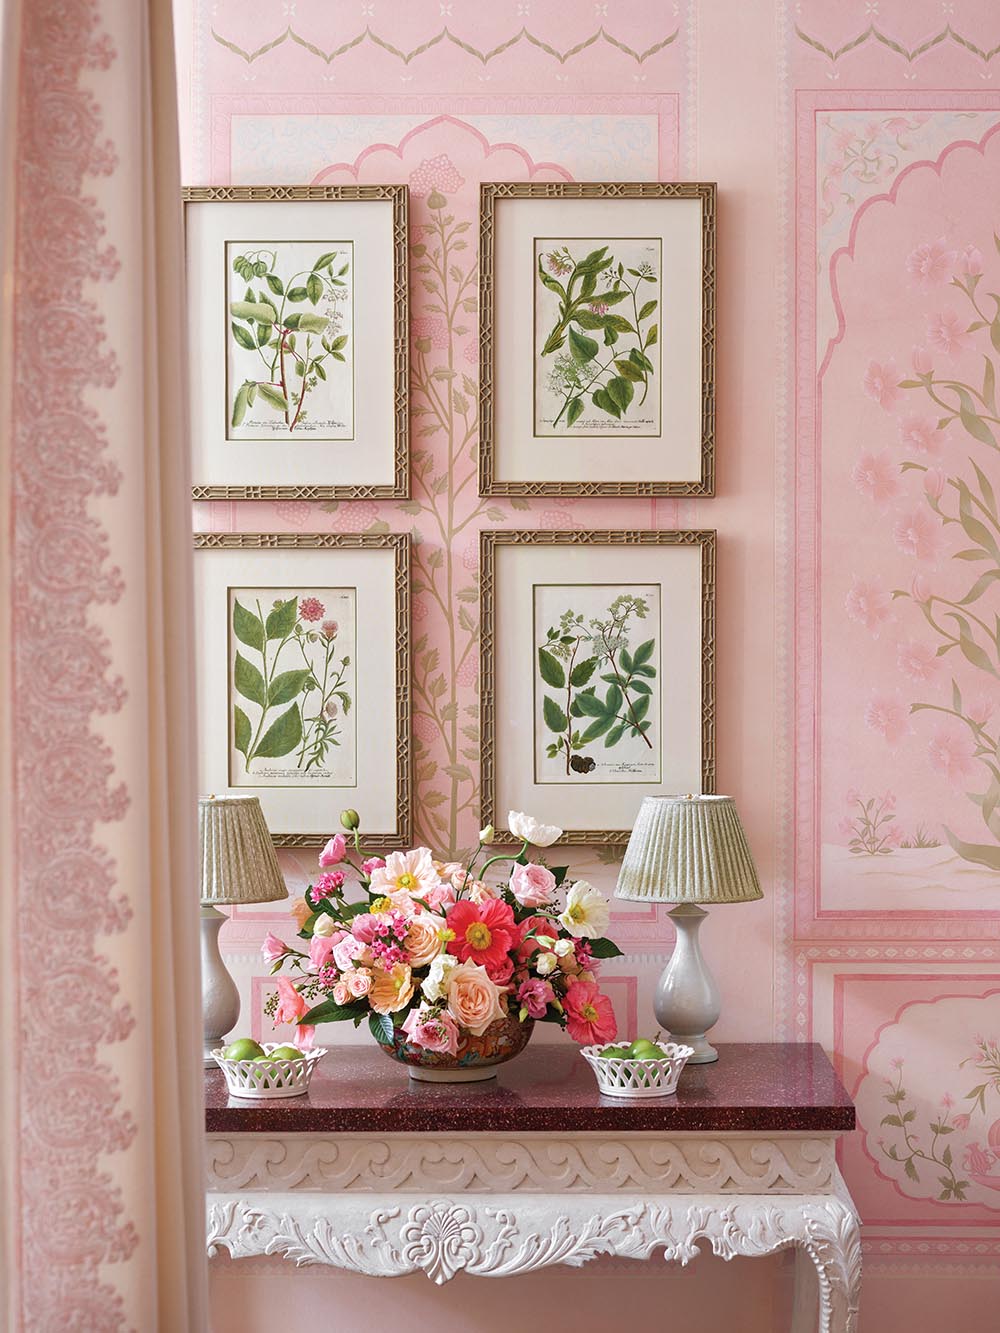 Console table with flower arrangement in pinks and corals under four botanical prints on pink, Indian-inspired wallpaper.